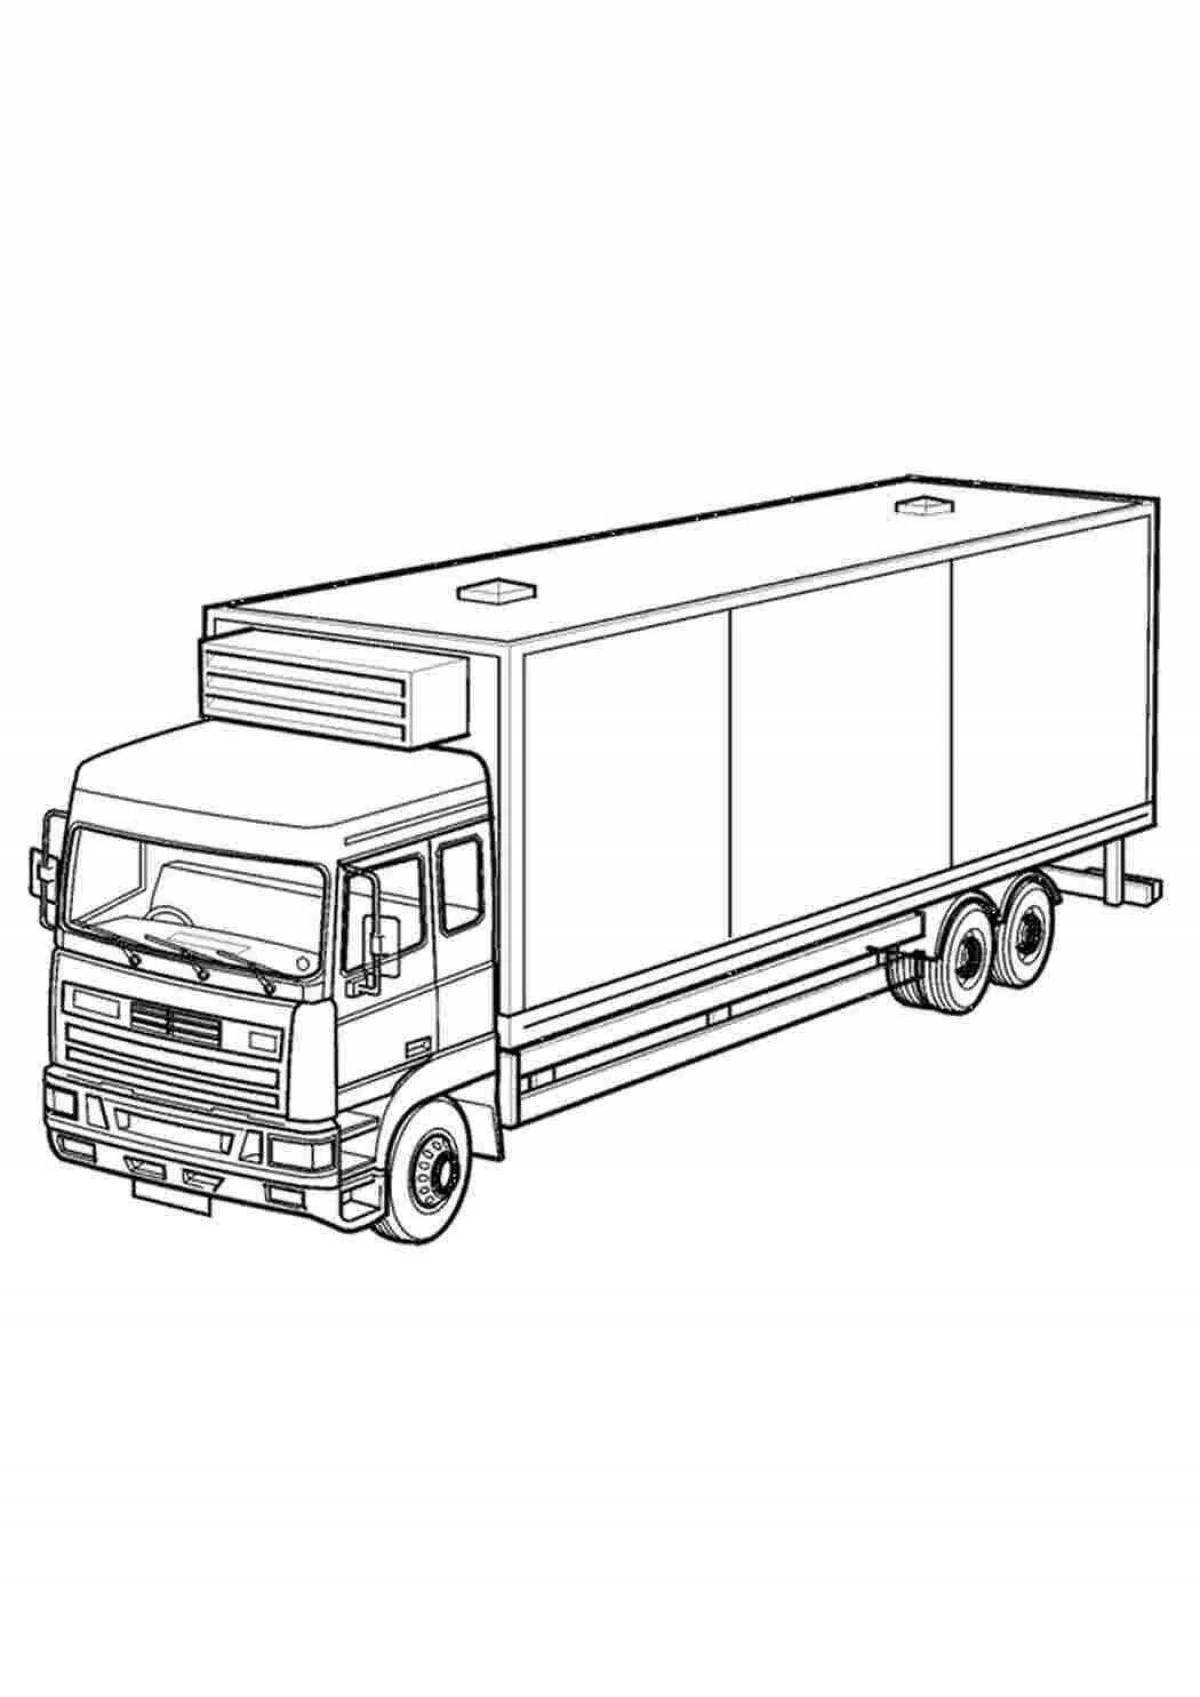 Coloring book grand truck for boys